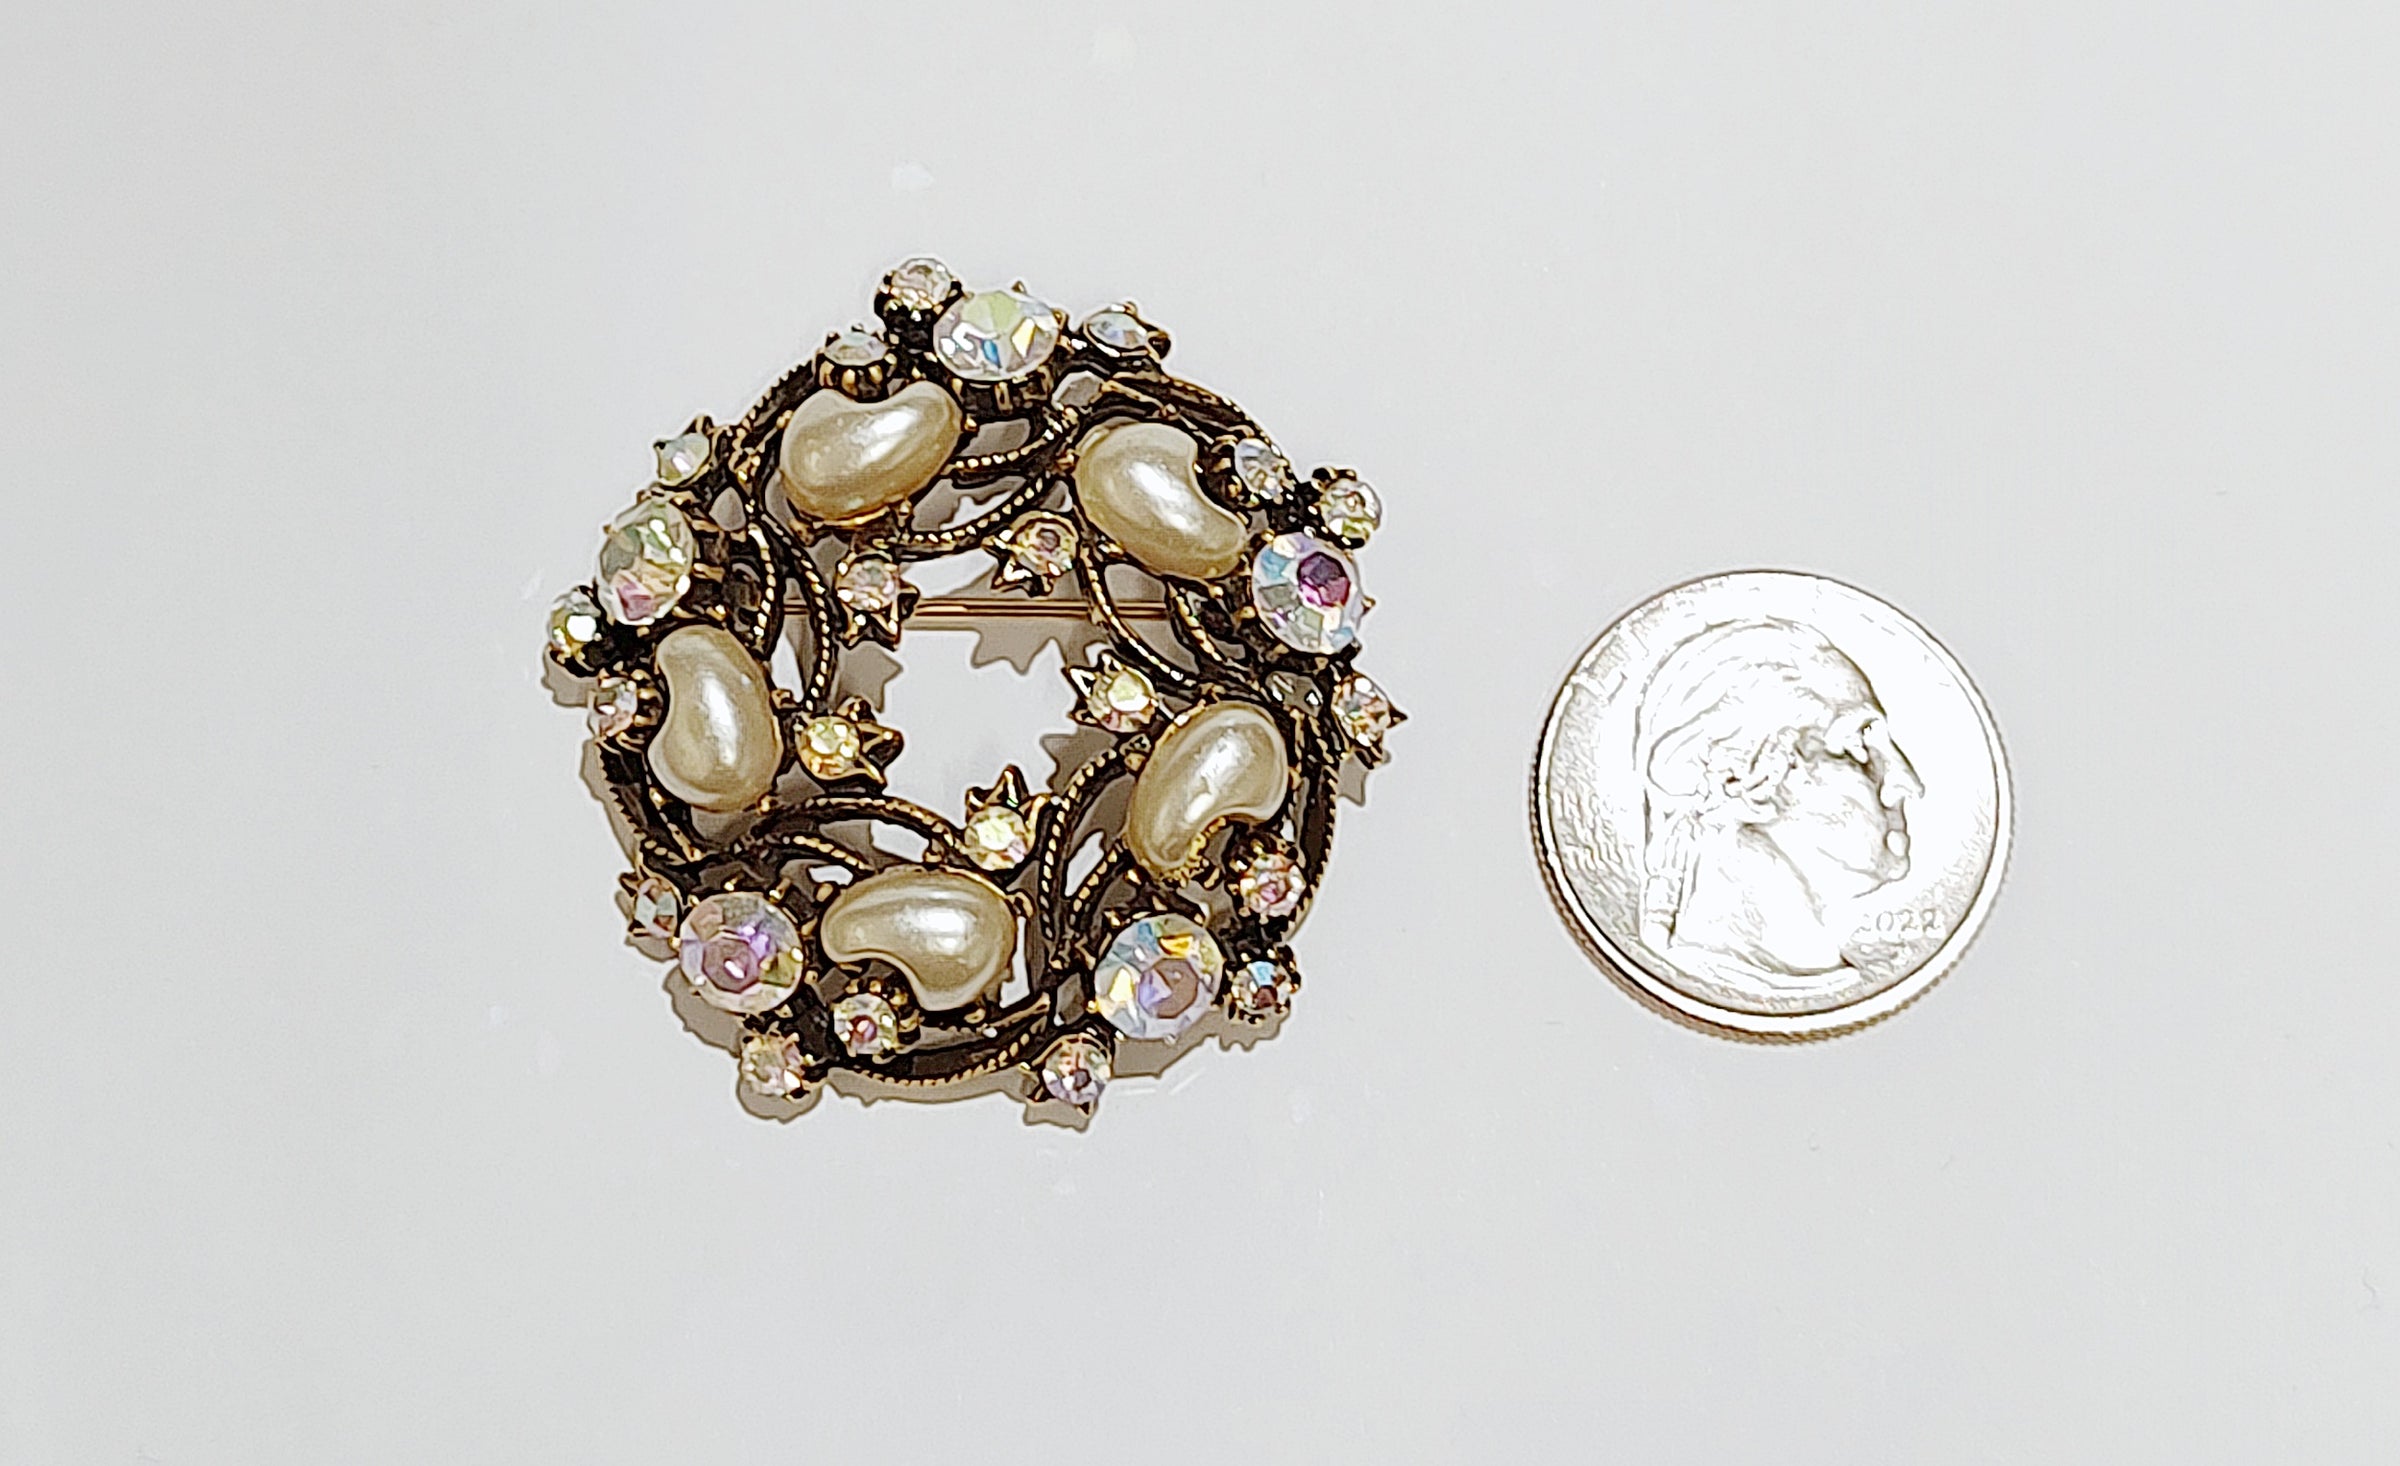 Vintage Florenza AB Rhinestone and Faux Pearl Brooch Pin - Hers and His Treasures